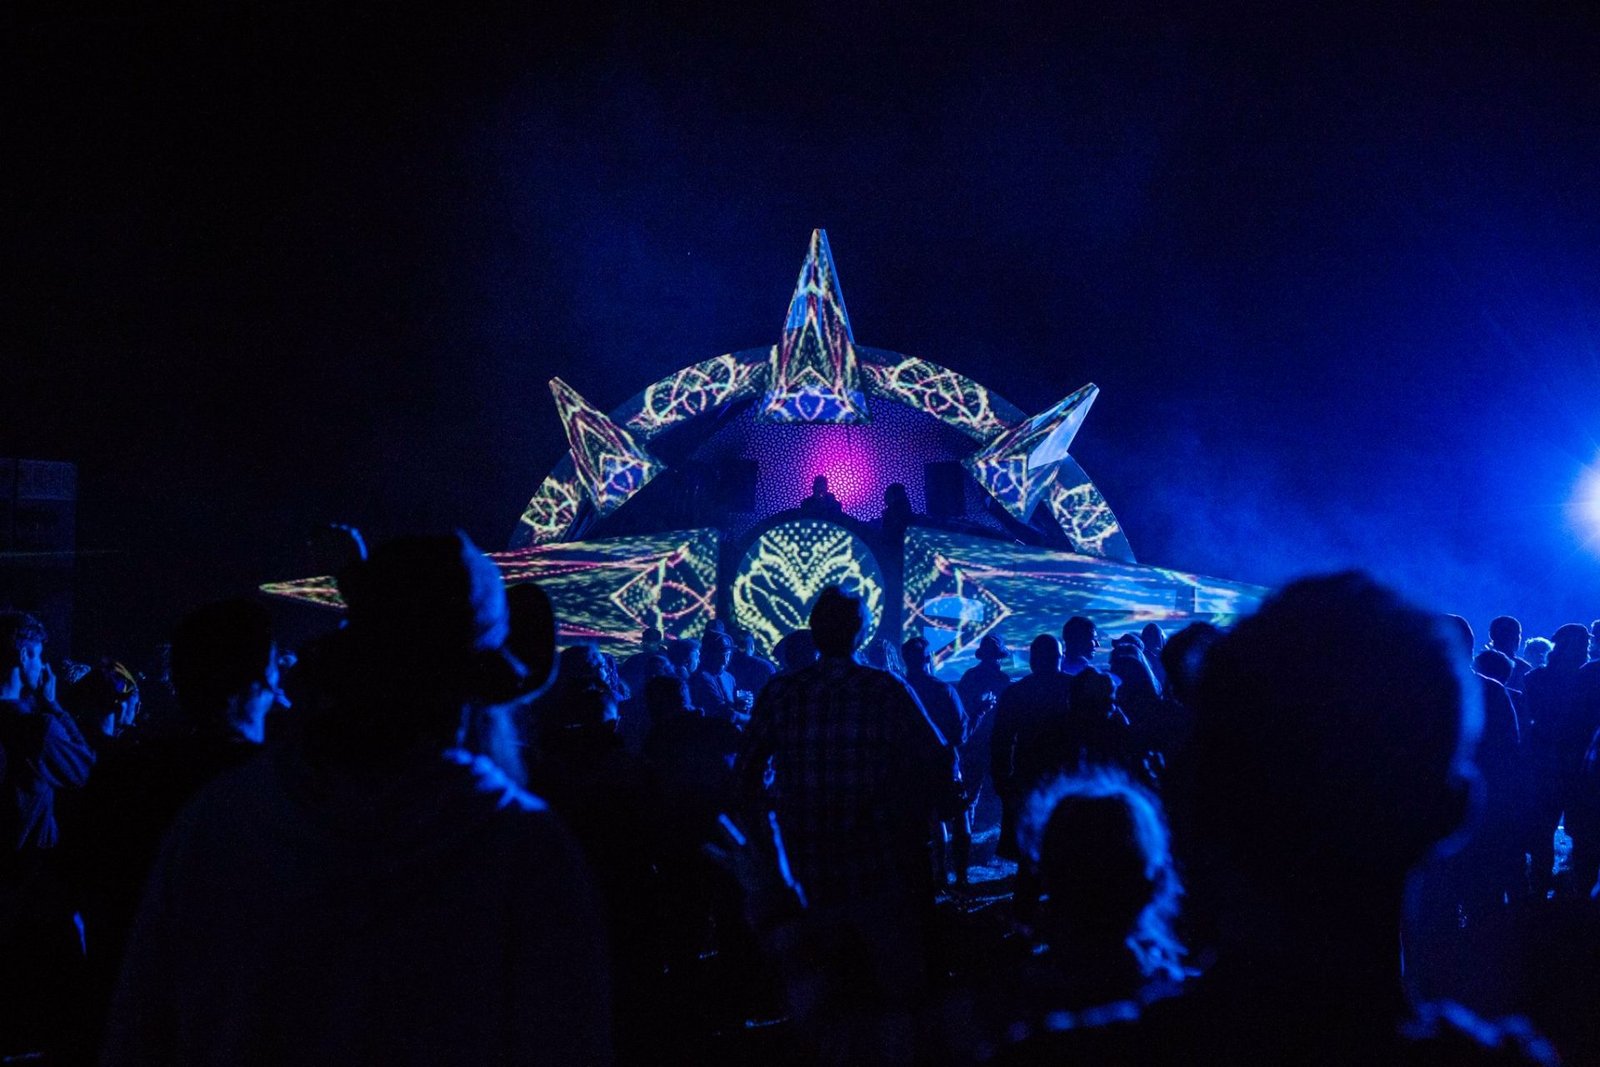 This Image represents Atlas festival front stage produced by SoundSphere with the help of Mutex